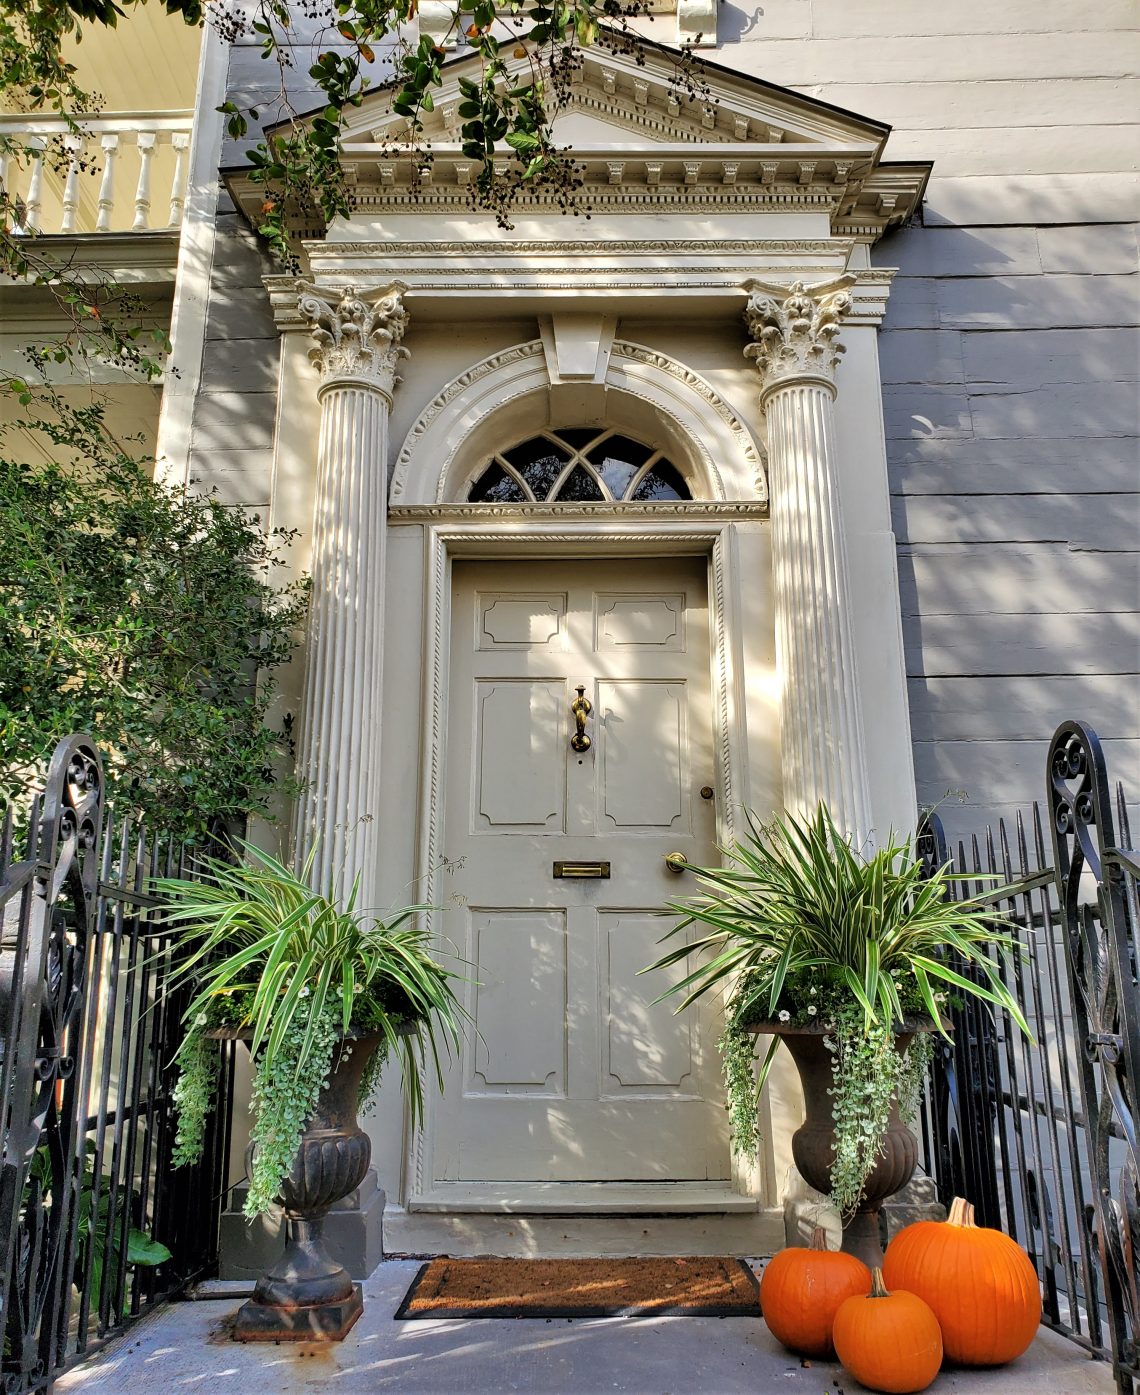 This beautiful door, accessorized for the season, belongs to the Col. John Stuart House on Tradd Street -- a wonderful Colonial era house (c. 1767). Col. Stuart, a native born Scotsman, had been appointed Superintendent of Indian Affairs for the southern British colonies in 1762, but in 1775 had to flee Charleston for stirring up the Native Americans against the colonists in the early stages of the American Revolutionary War. 